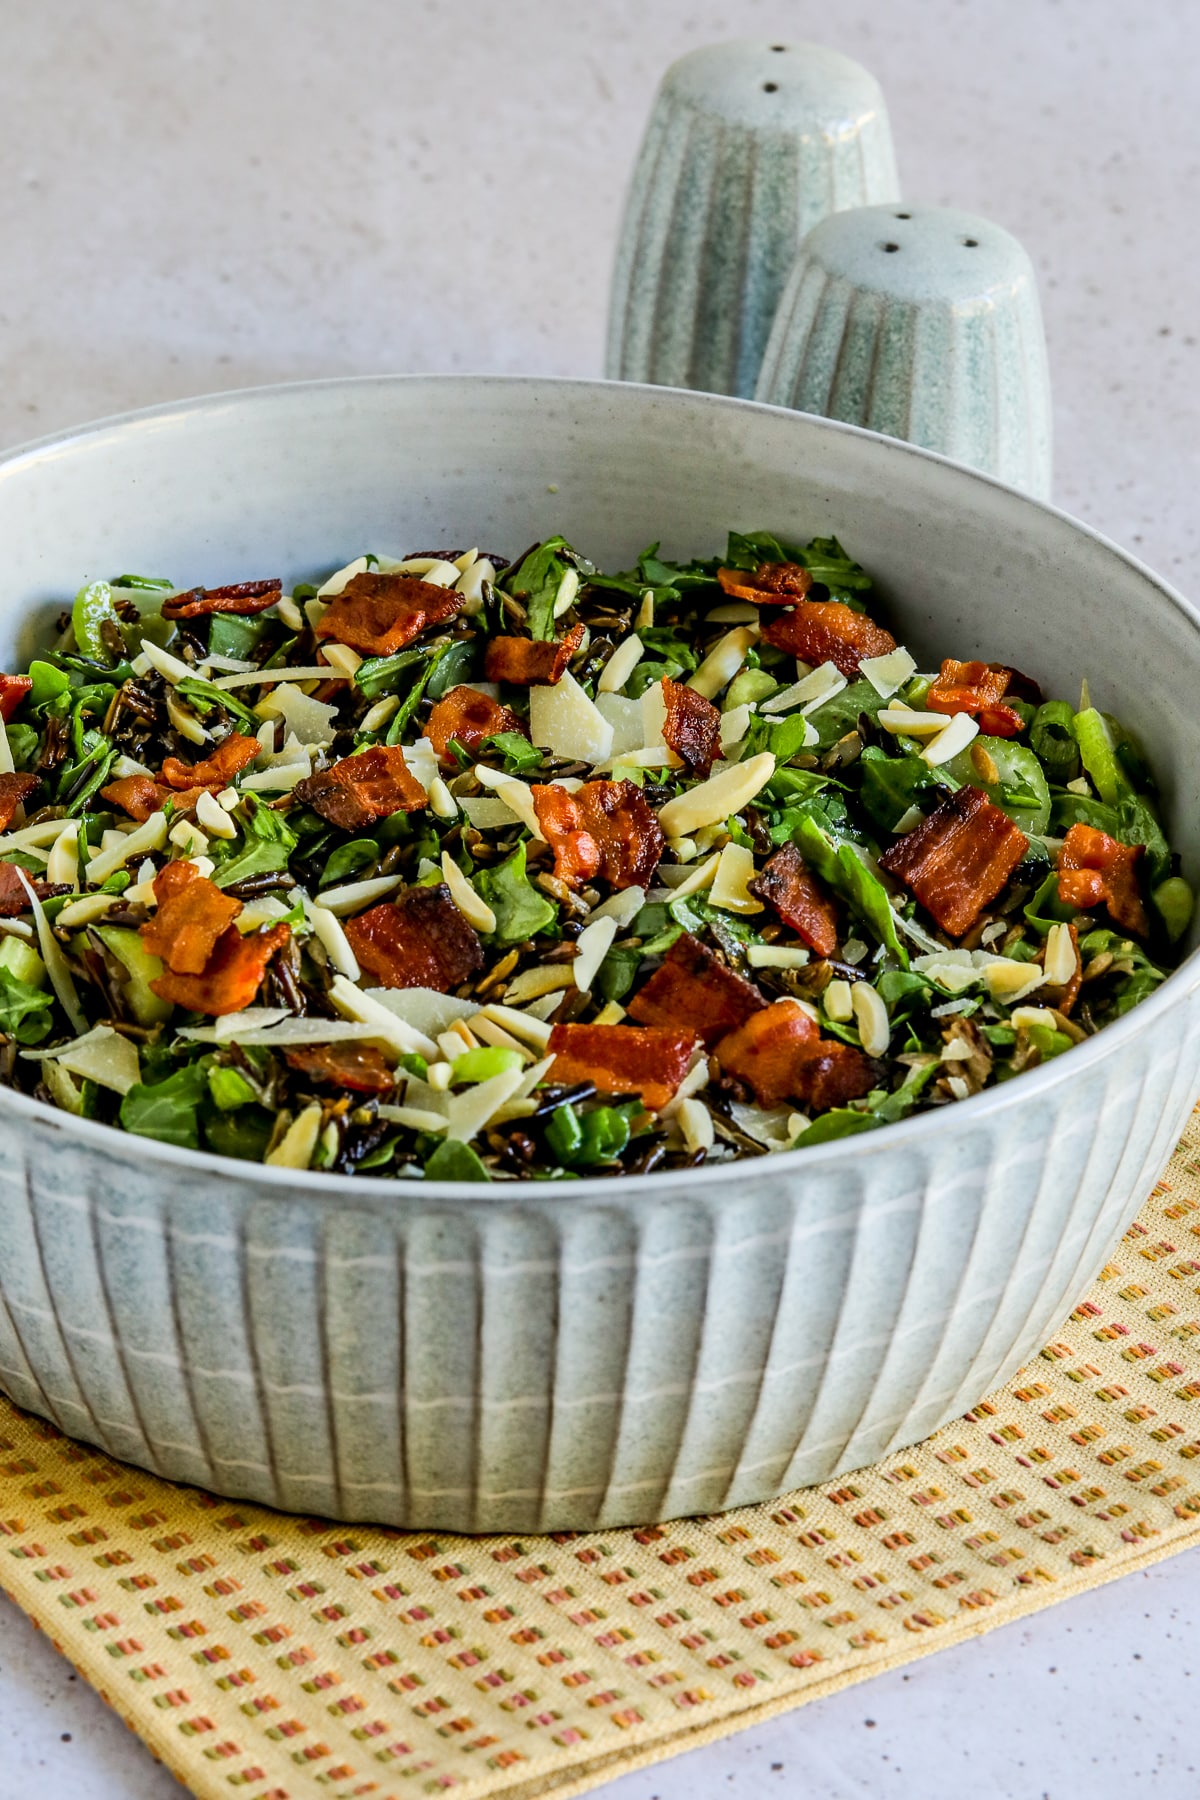 Farther back image for Wild Rice Salad with Bacon and Arugula shown in bowl with salt-pepper in back.